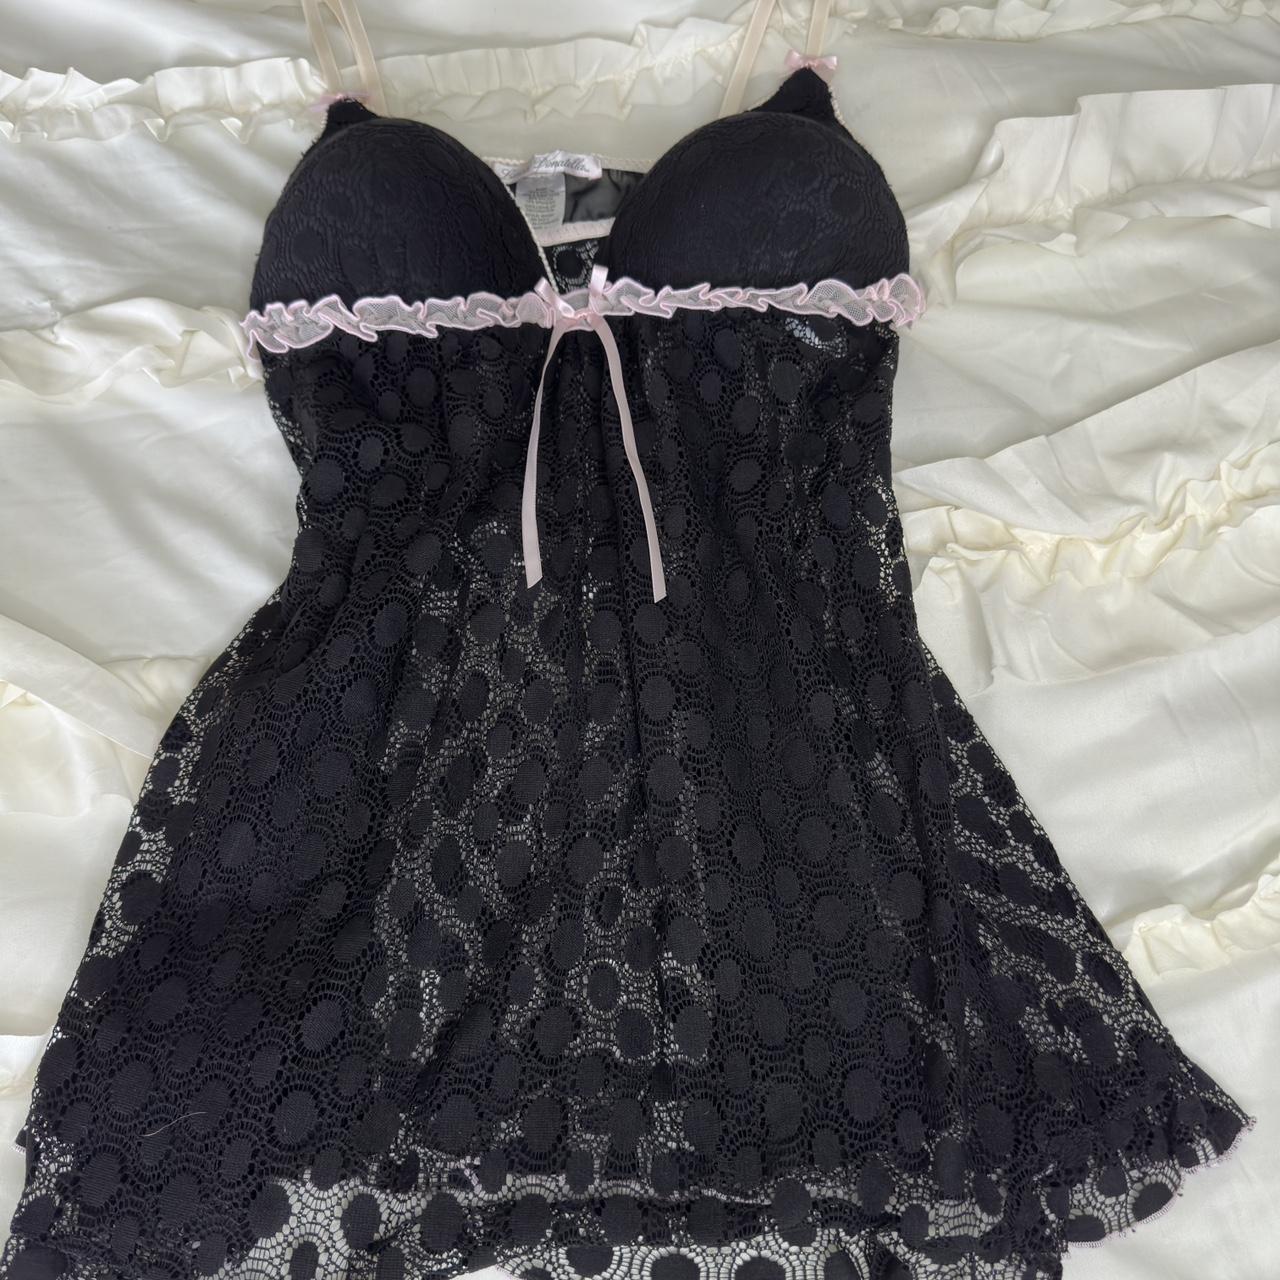 item listed by graciebrooke